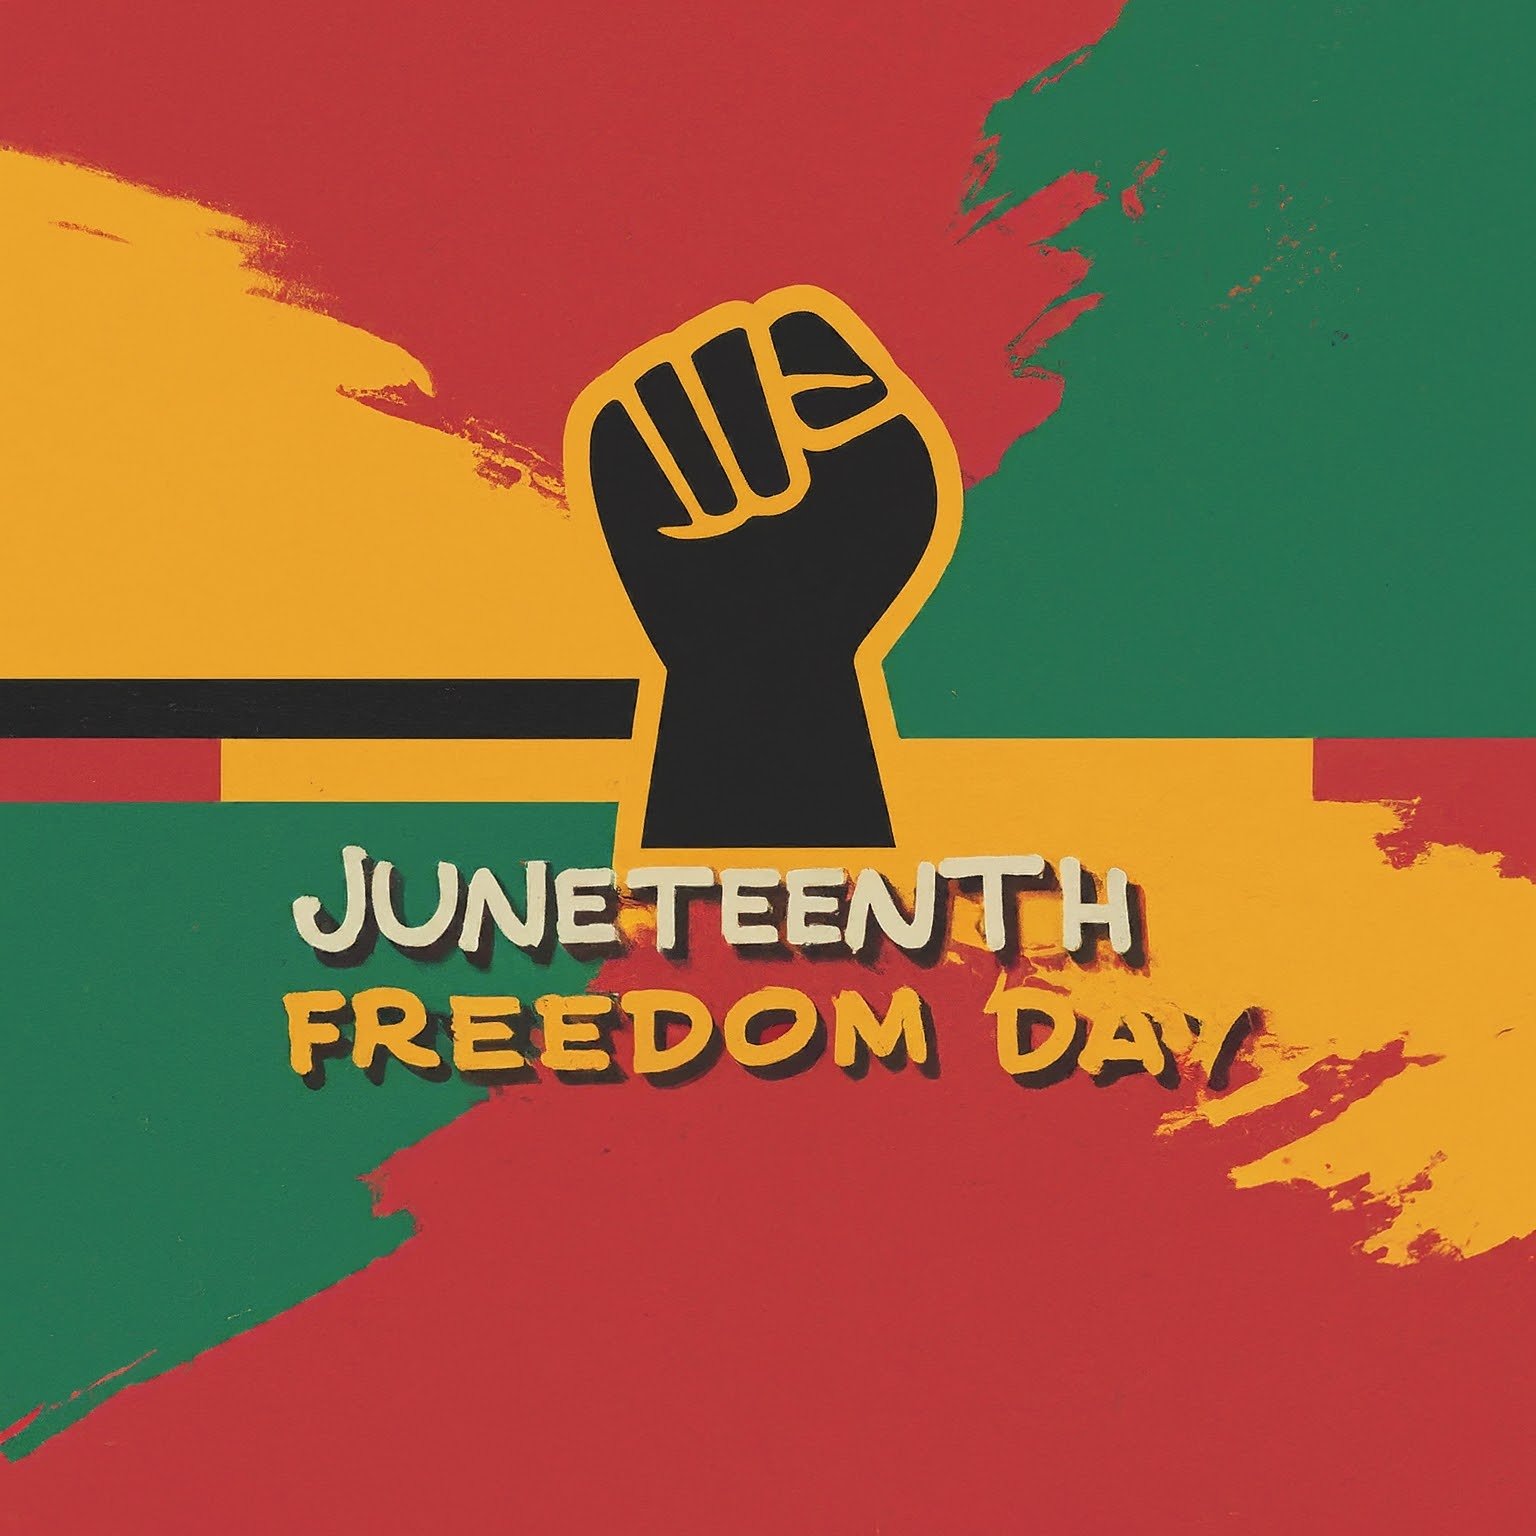 Colossus SSP Wishes Everyone a Happy Juneteenth!